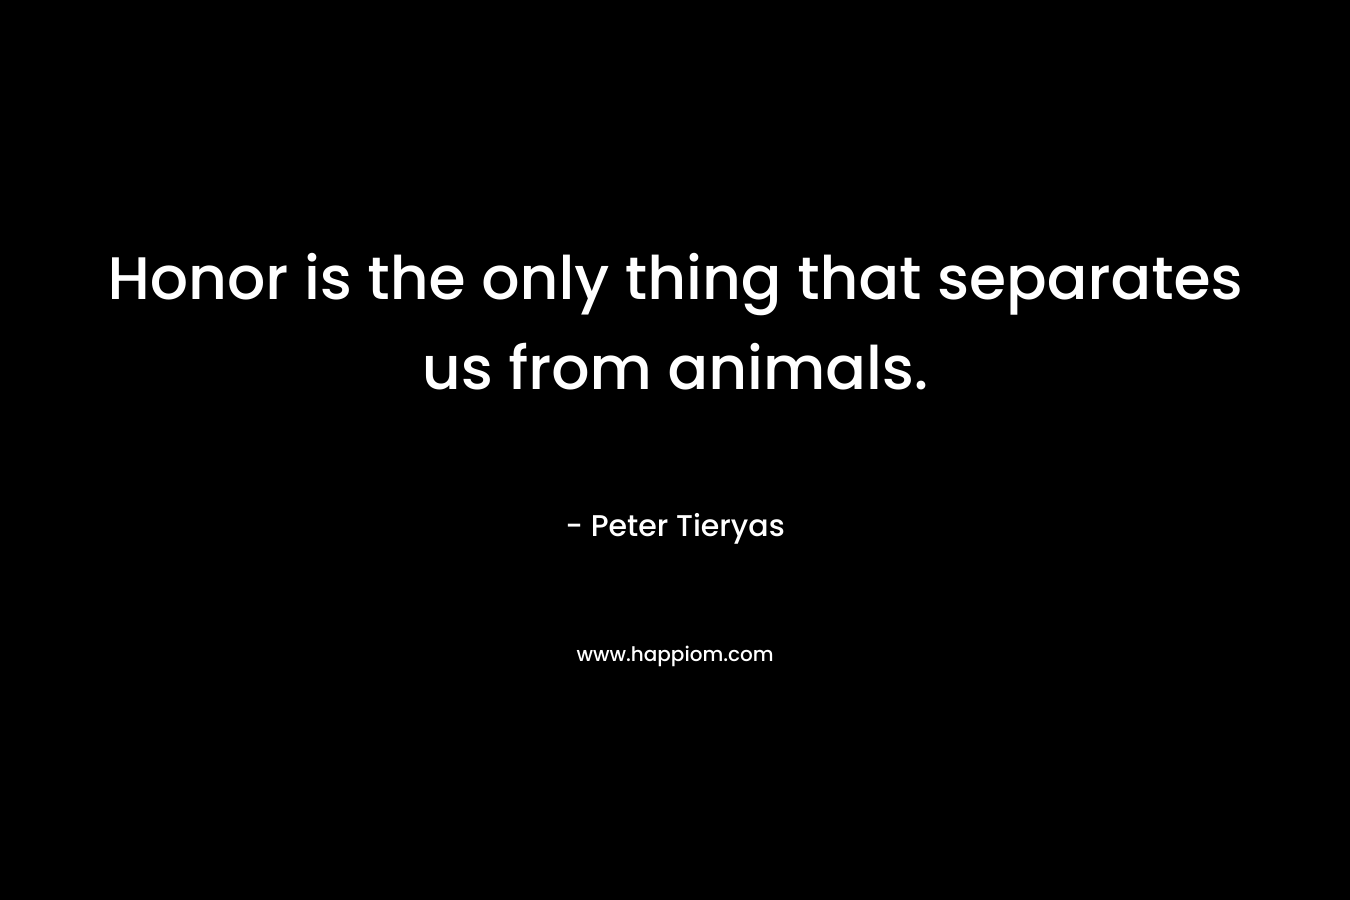 Honor is the only thing that separates us from animals. – Peter Tieryas